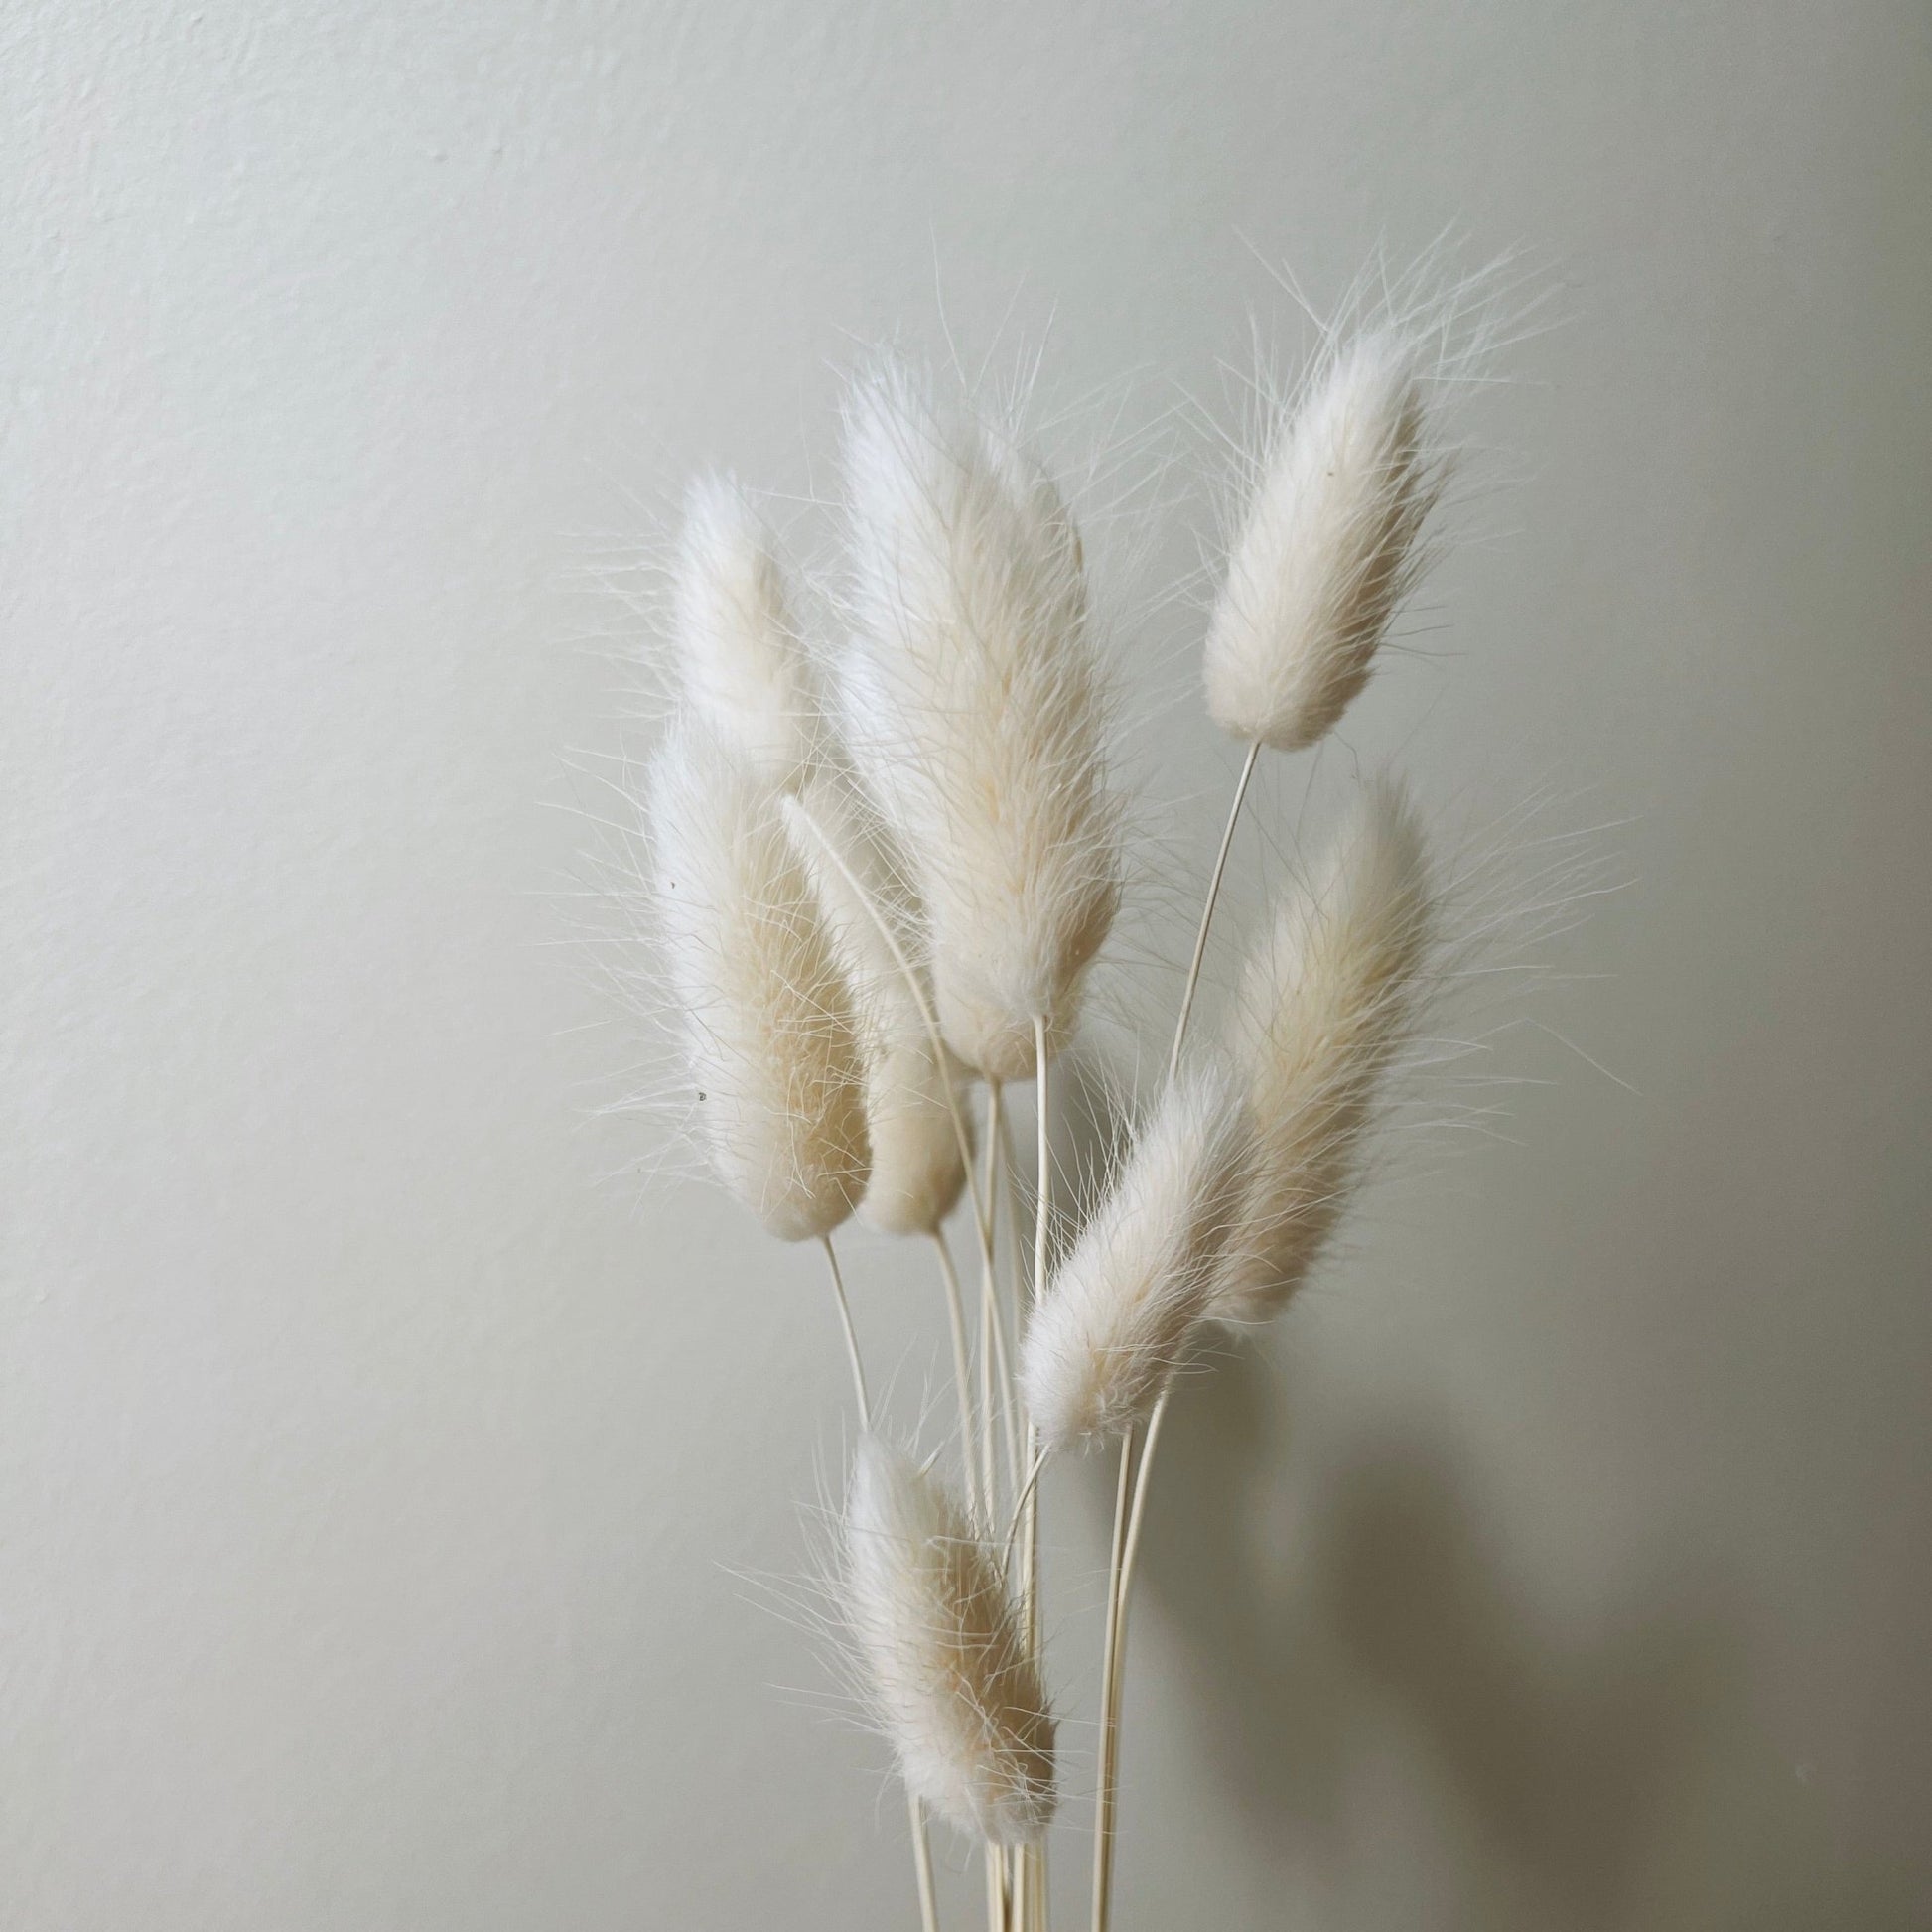 Dried Lagurus Grass/Bunny Tails Bunch, Ivory - Ivy Nook